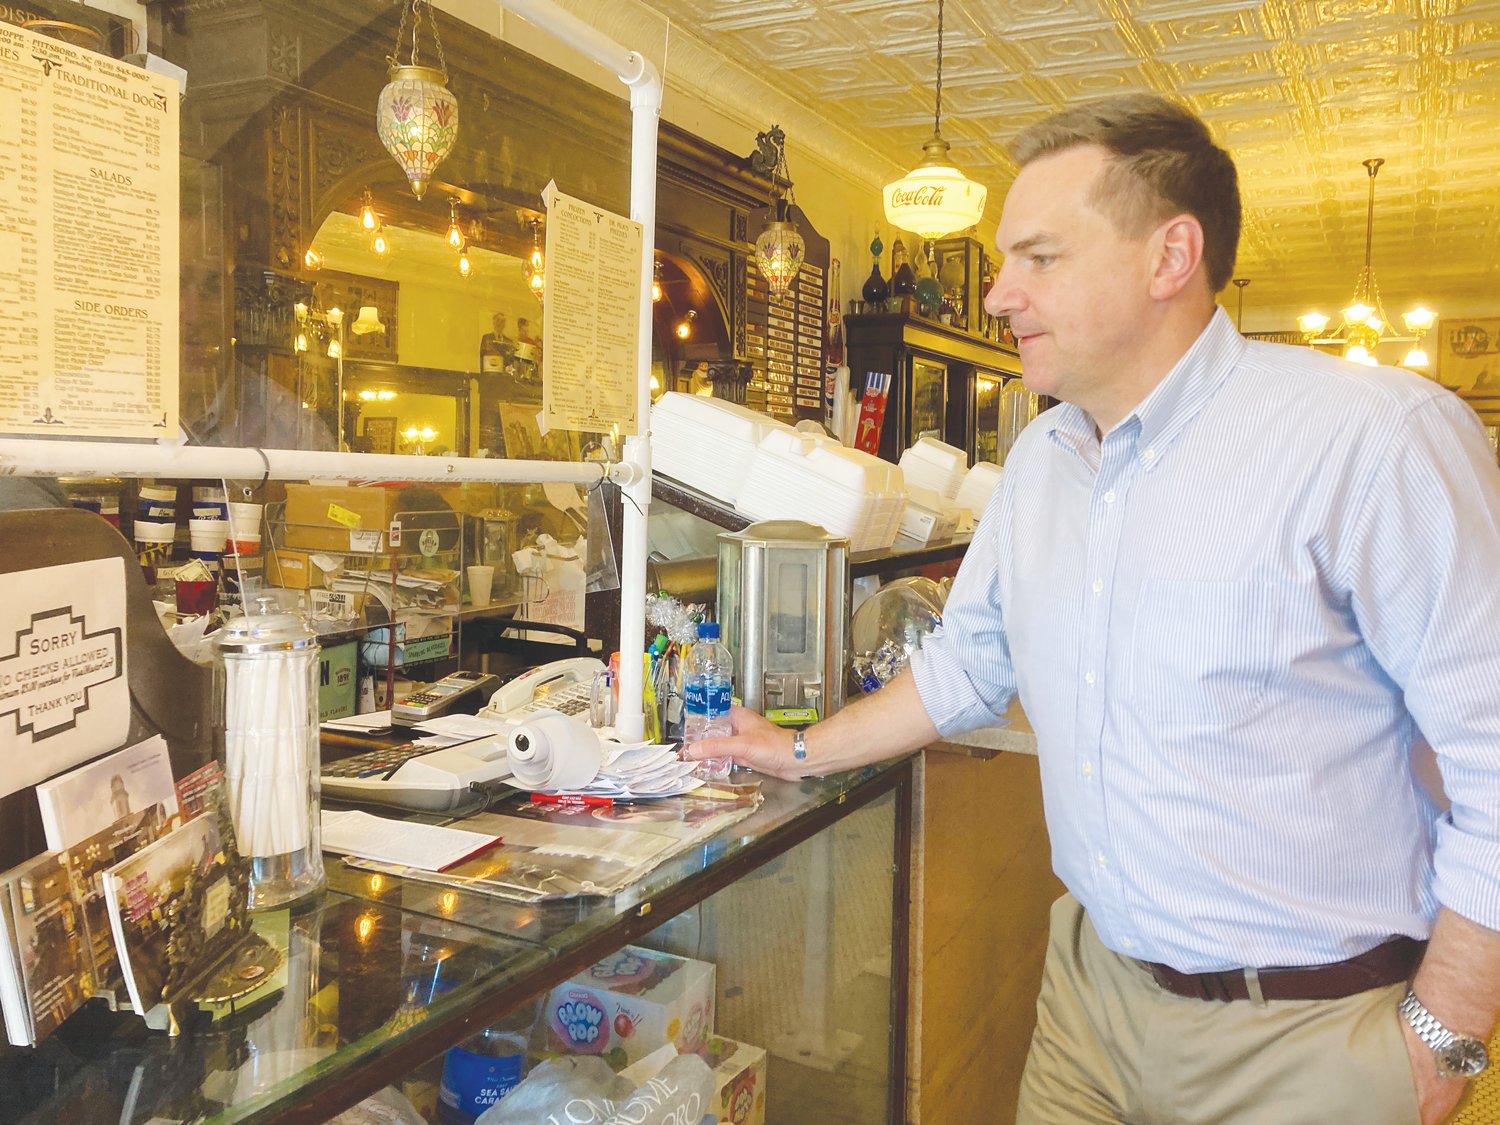 Congressman Richard Hudson Jr. stands at the counter of S&T's Soda Shoppe in downtown Pittsboro.